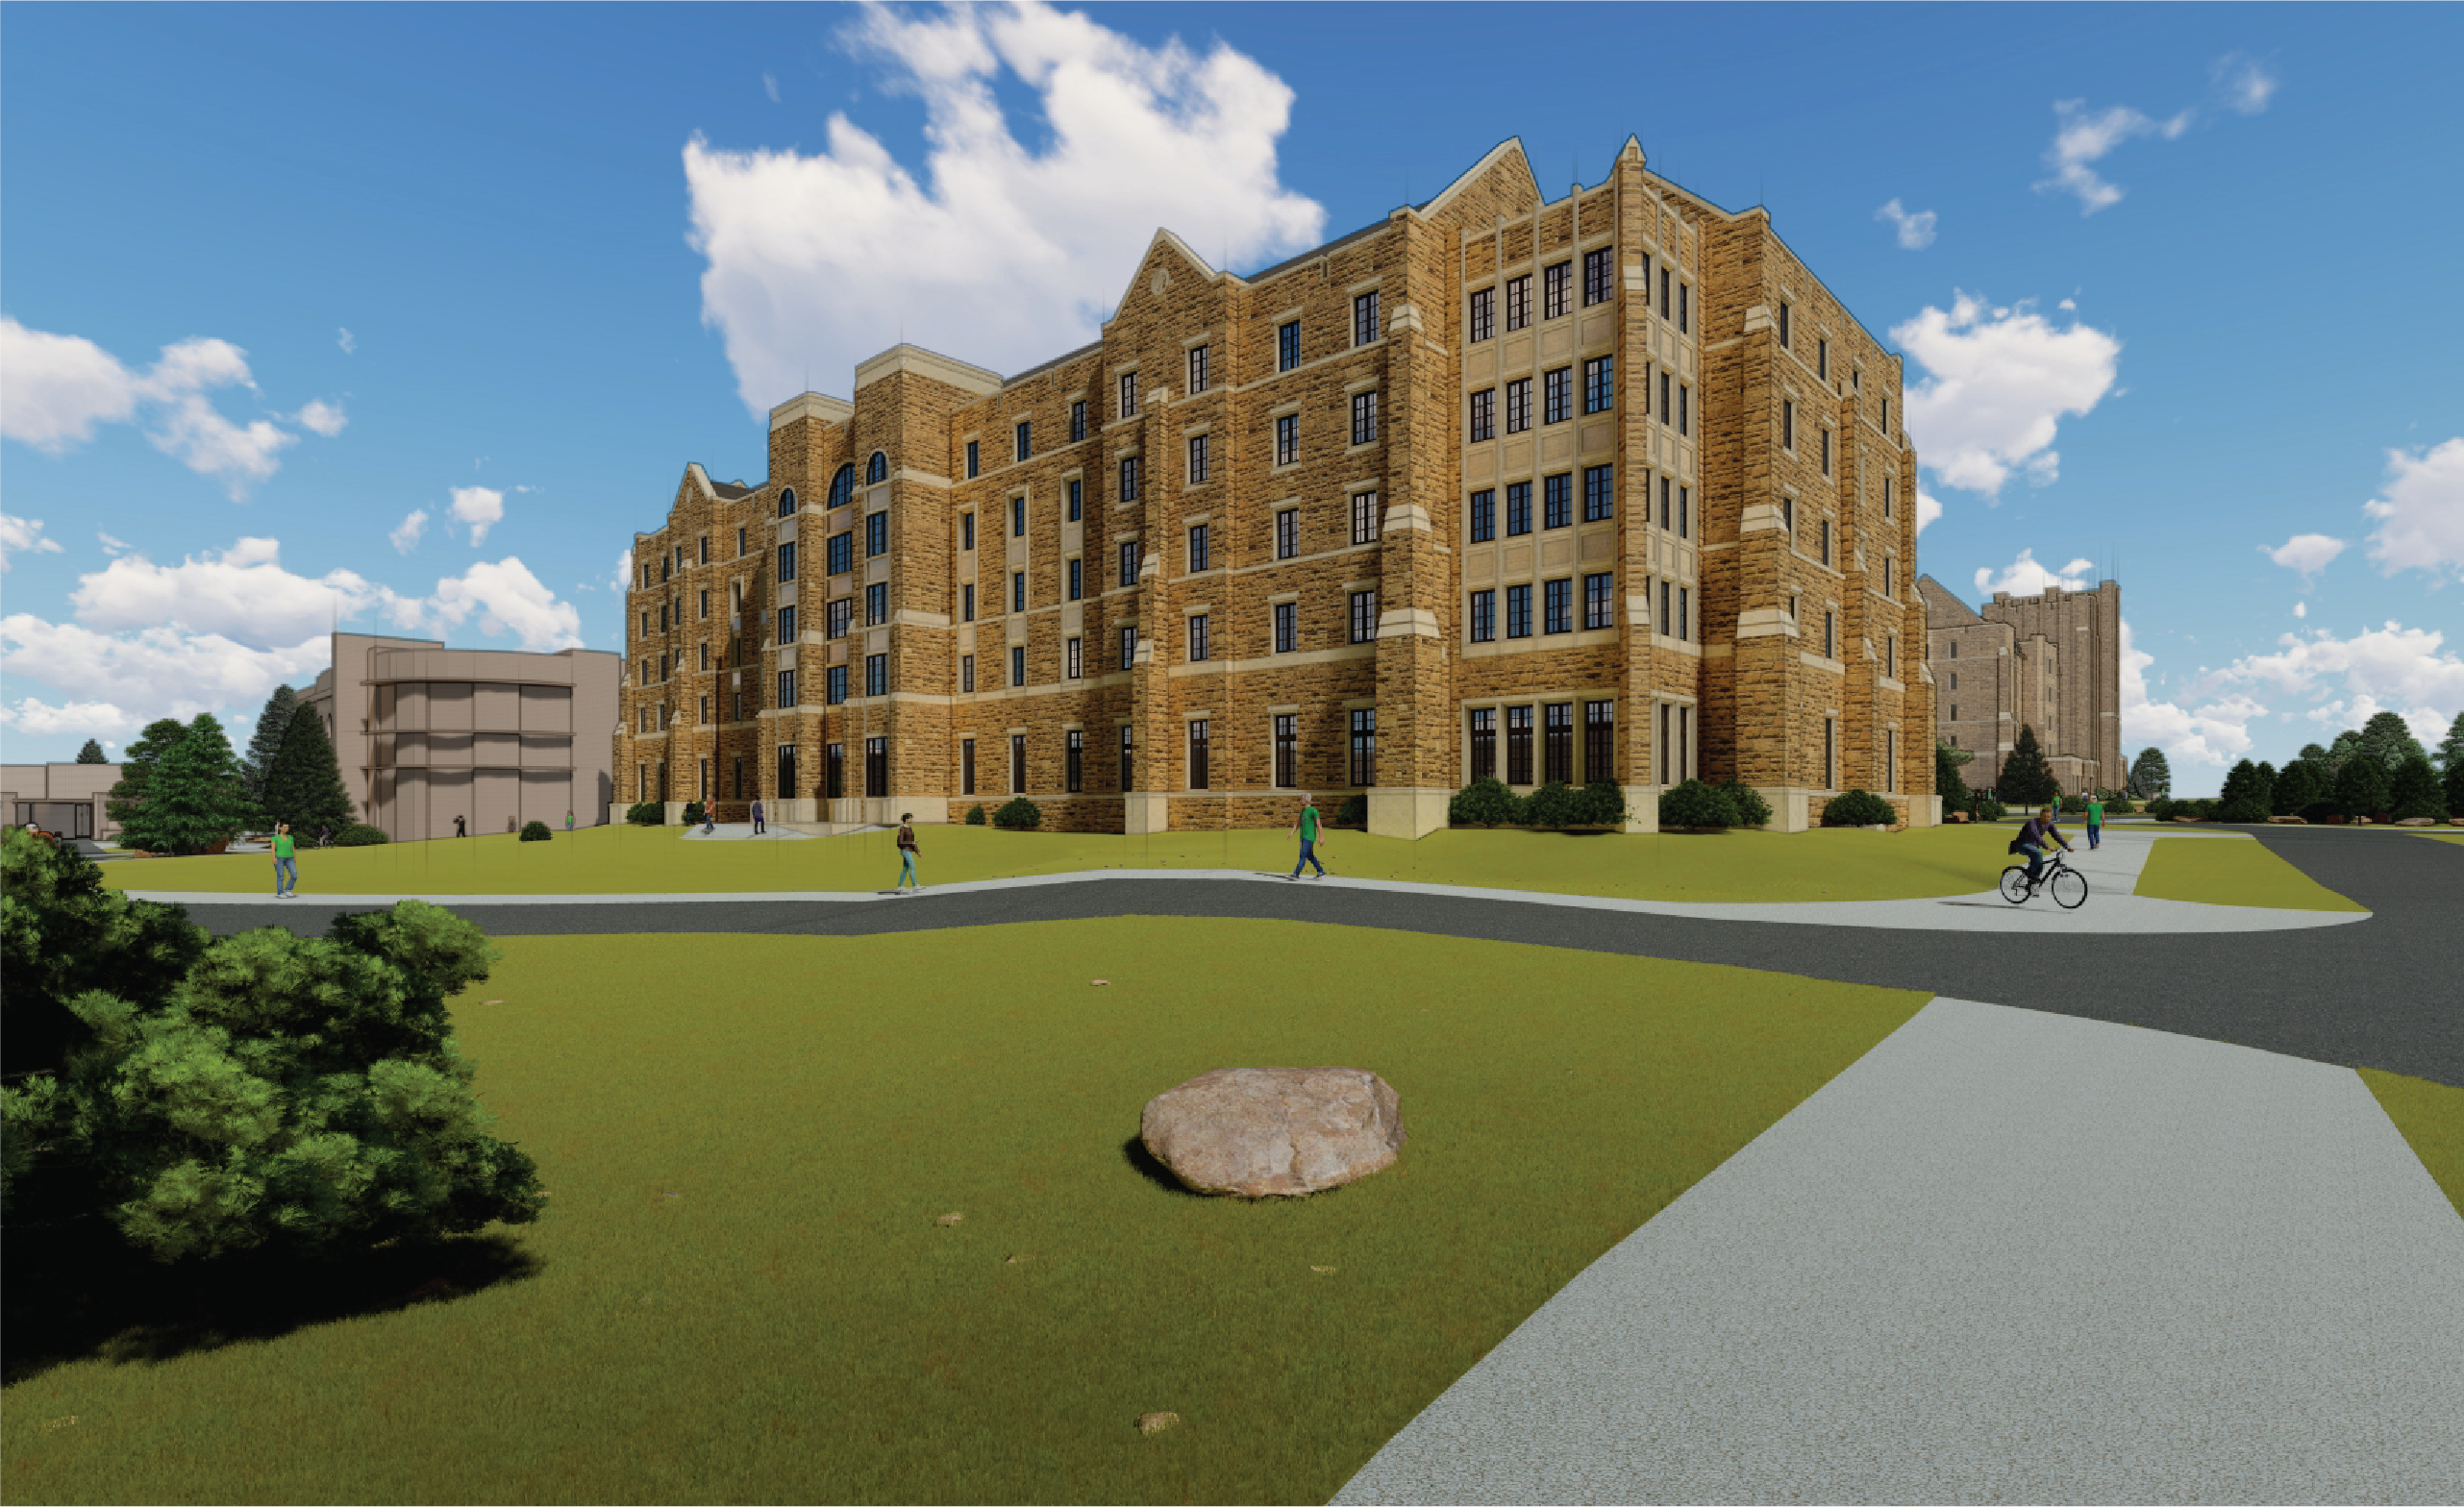 Exterior rendering of the new residence halls and dining facility